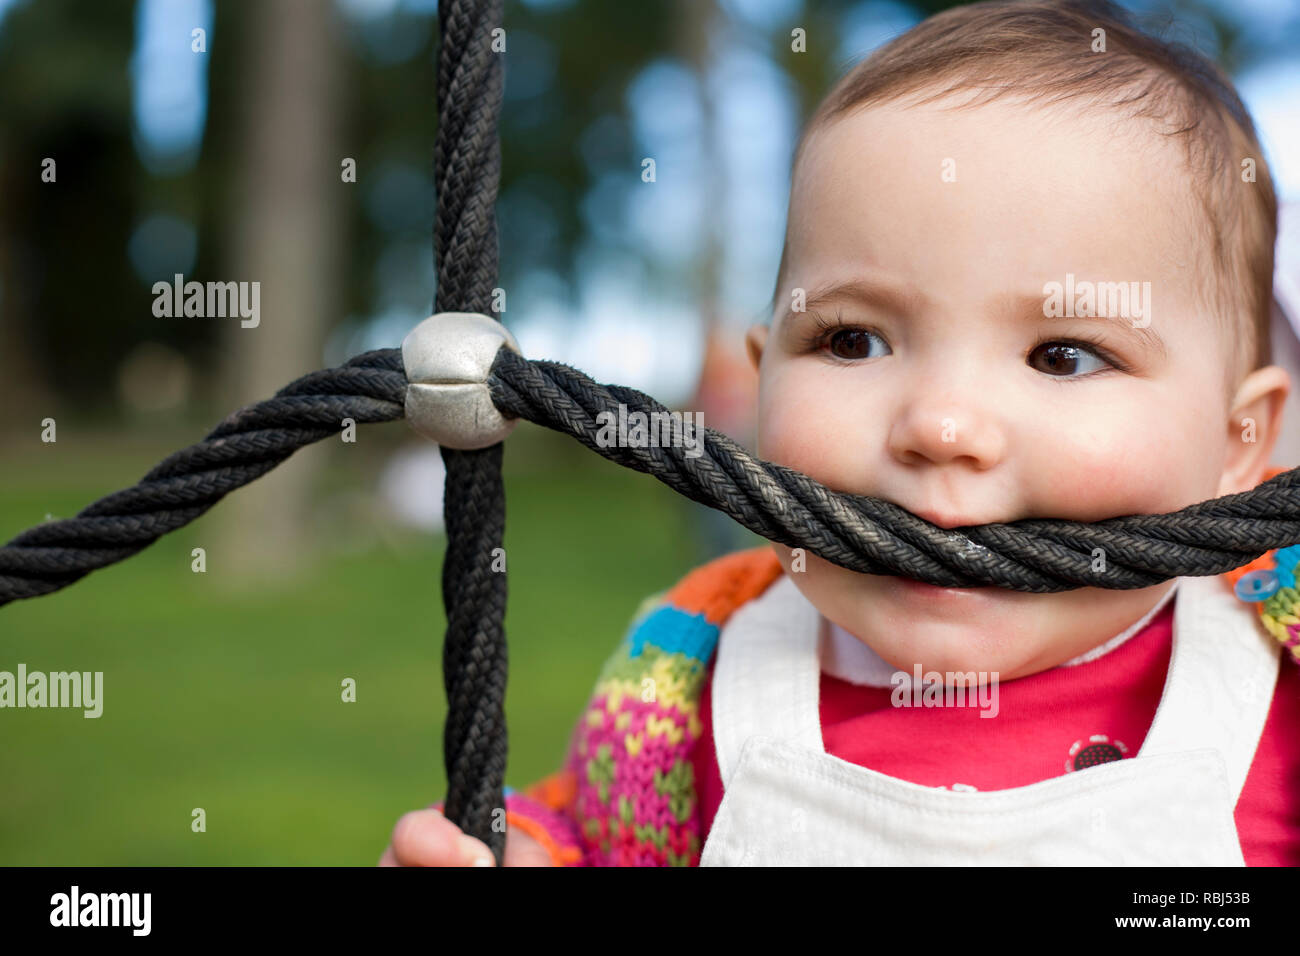 11 month baby girl biting playground rope as it was a teether. Biting and Teething for babies concept Stock Photo